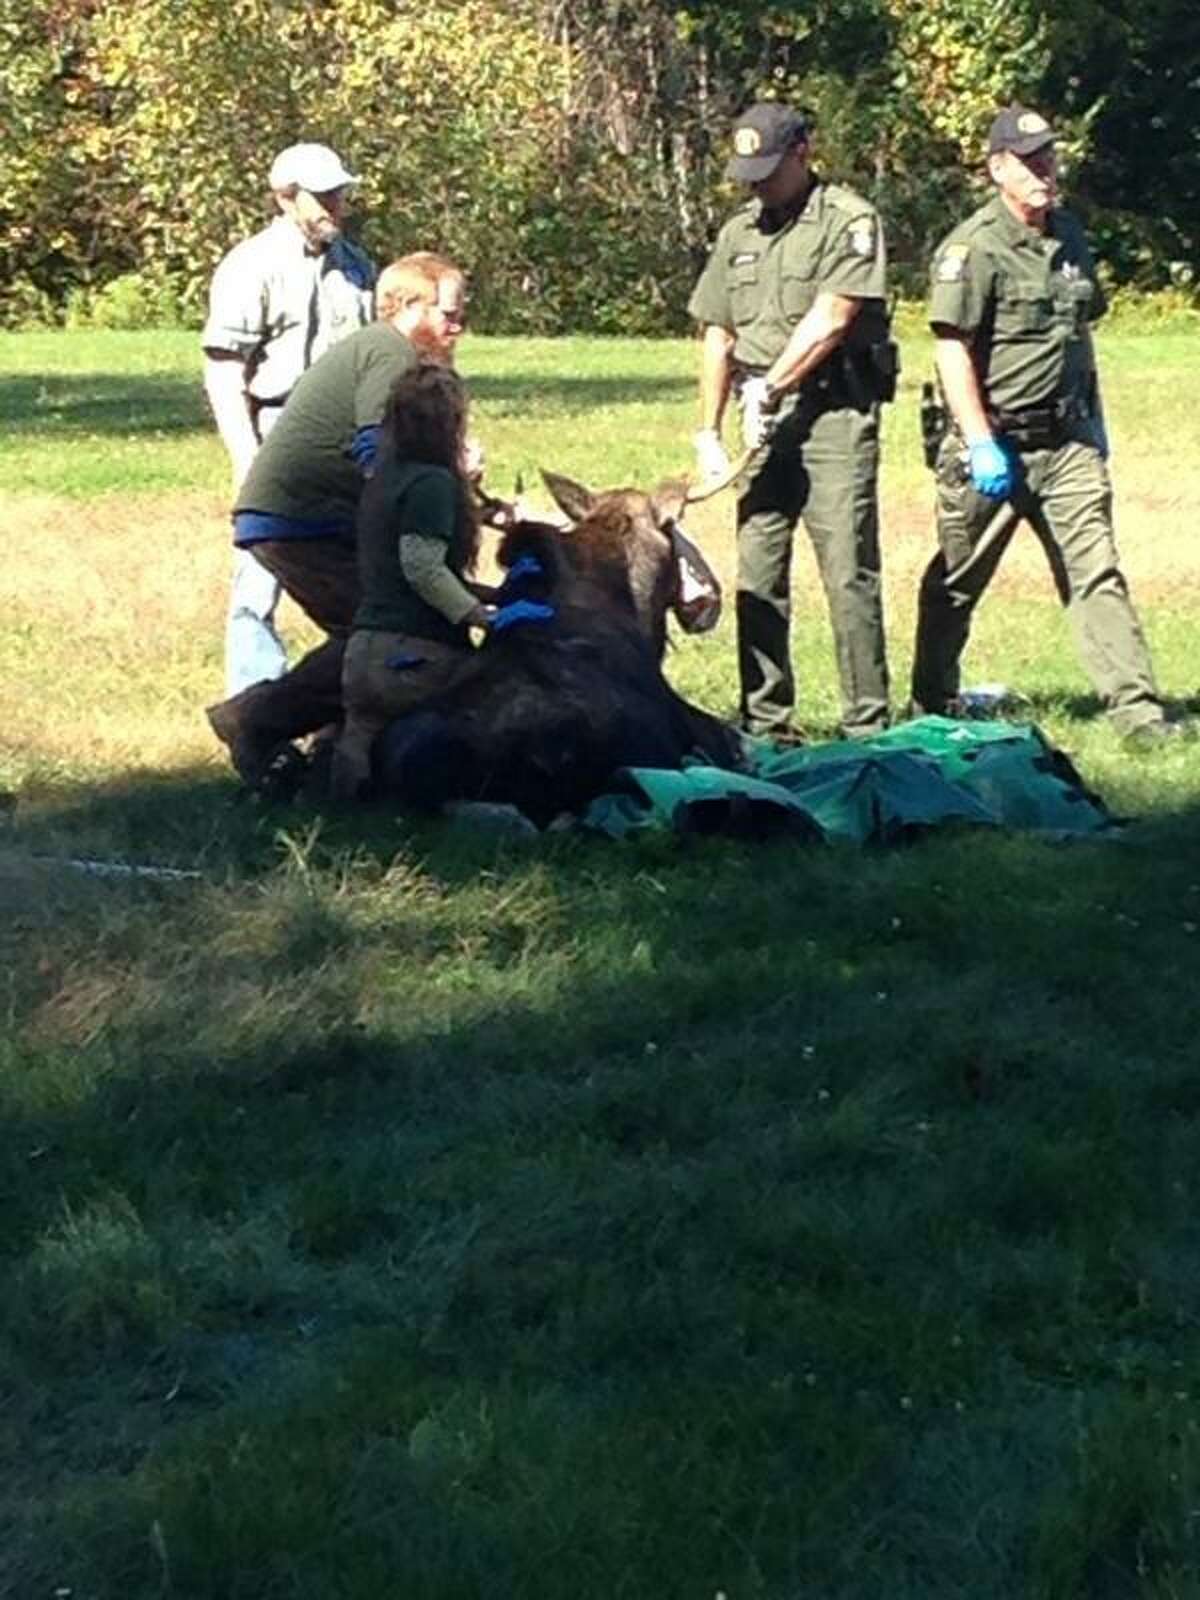 The Department of Environmental Conservation tranquilized a moose Tuesday morning after it was found in a yard in Halfmoon. (Matt Hamilton / Times Union)